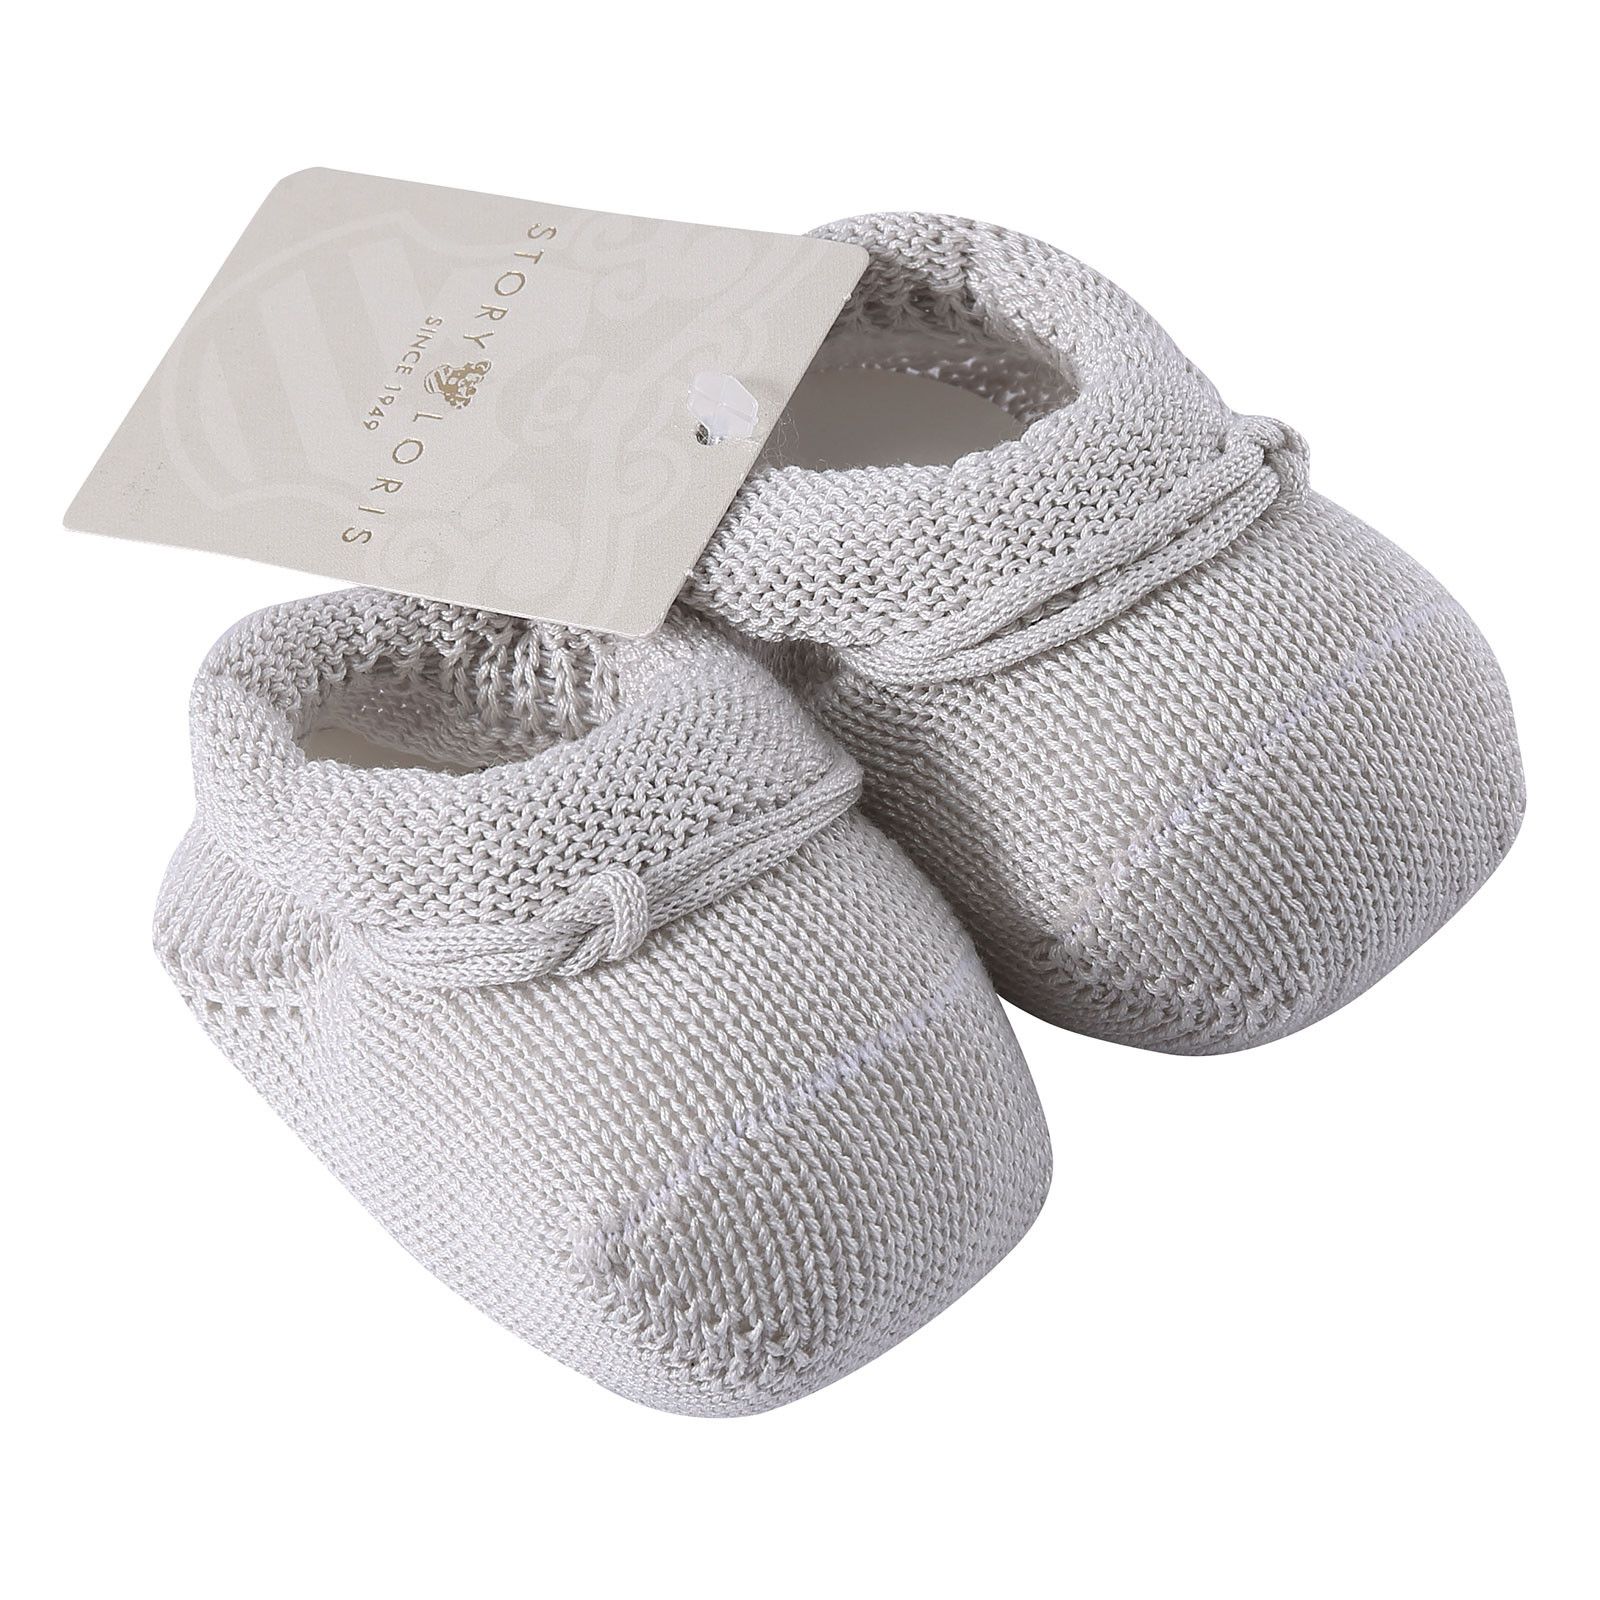 Baby Grey Knitted Cotton Shoes - CÉMAROSE | Children's Fashion Store - 2